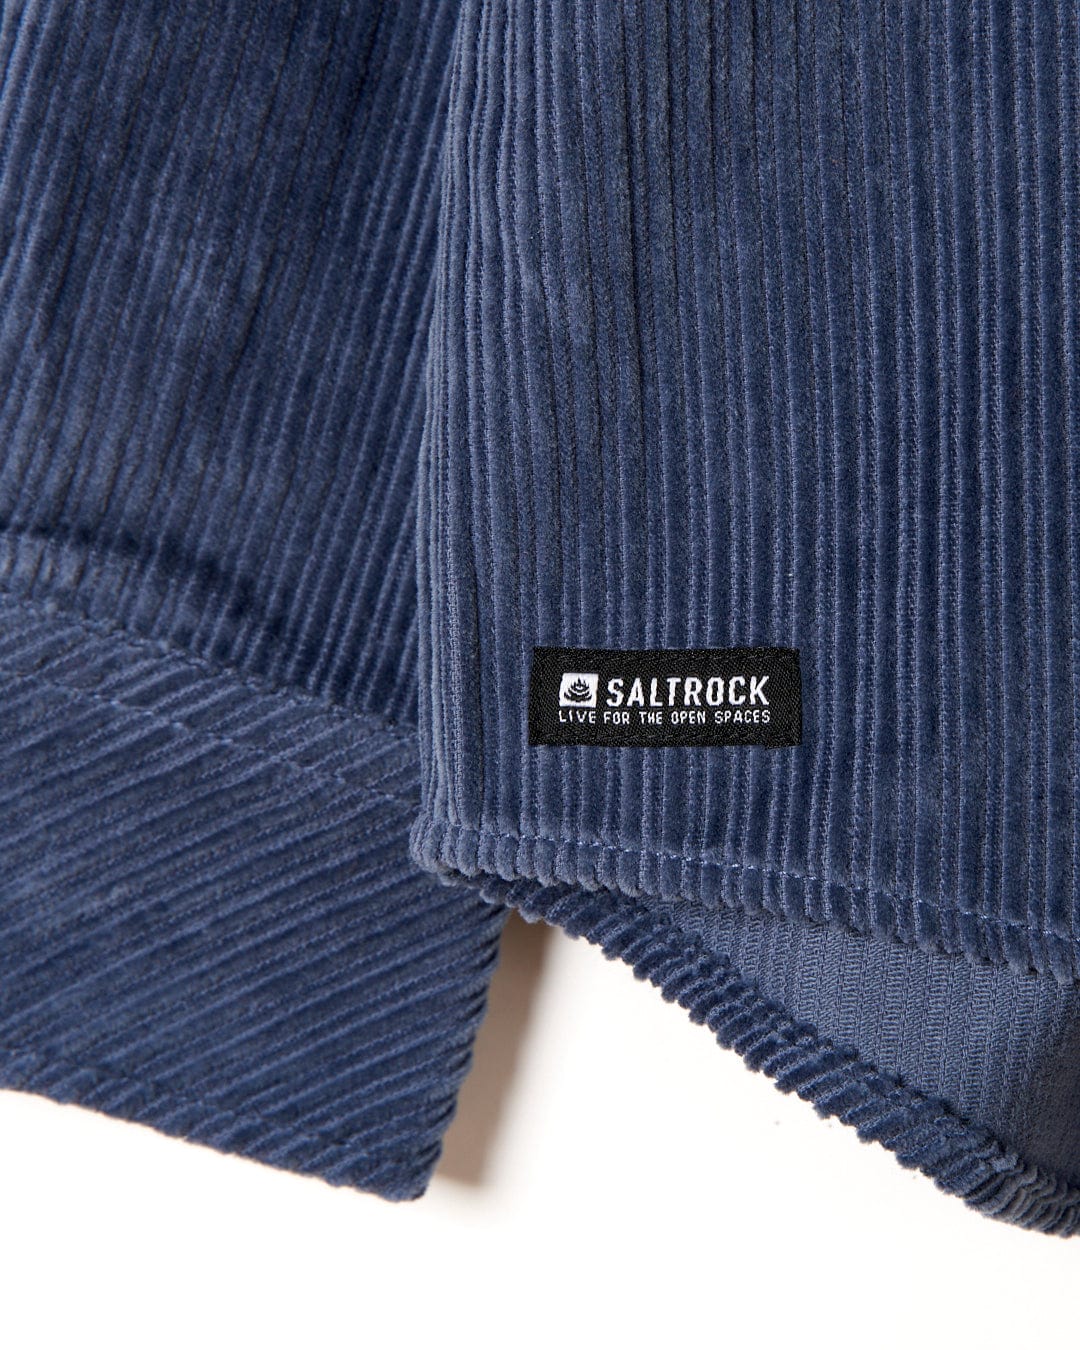 A Saltrock blue corduroy Ace - Mens Long Sleeve Shirt with front chest pockets and a label on it.